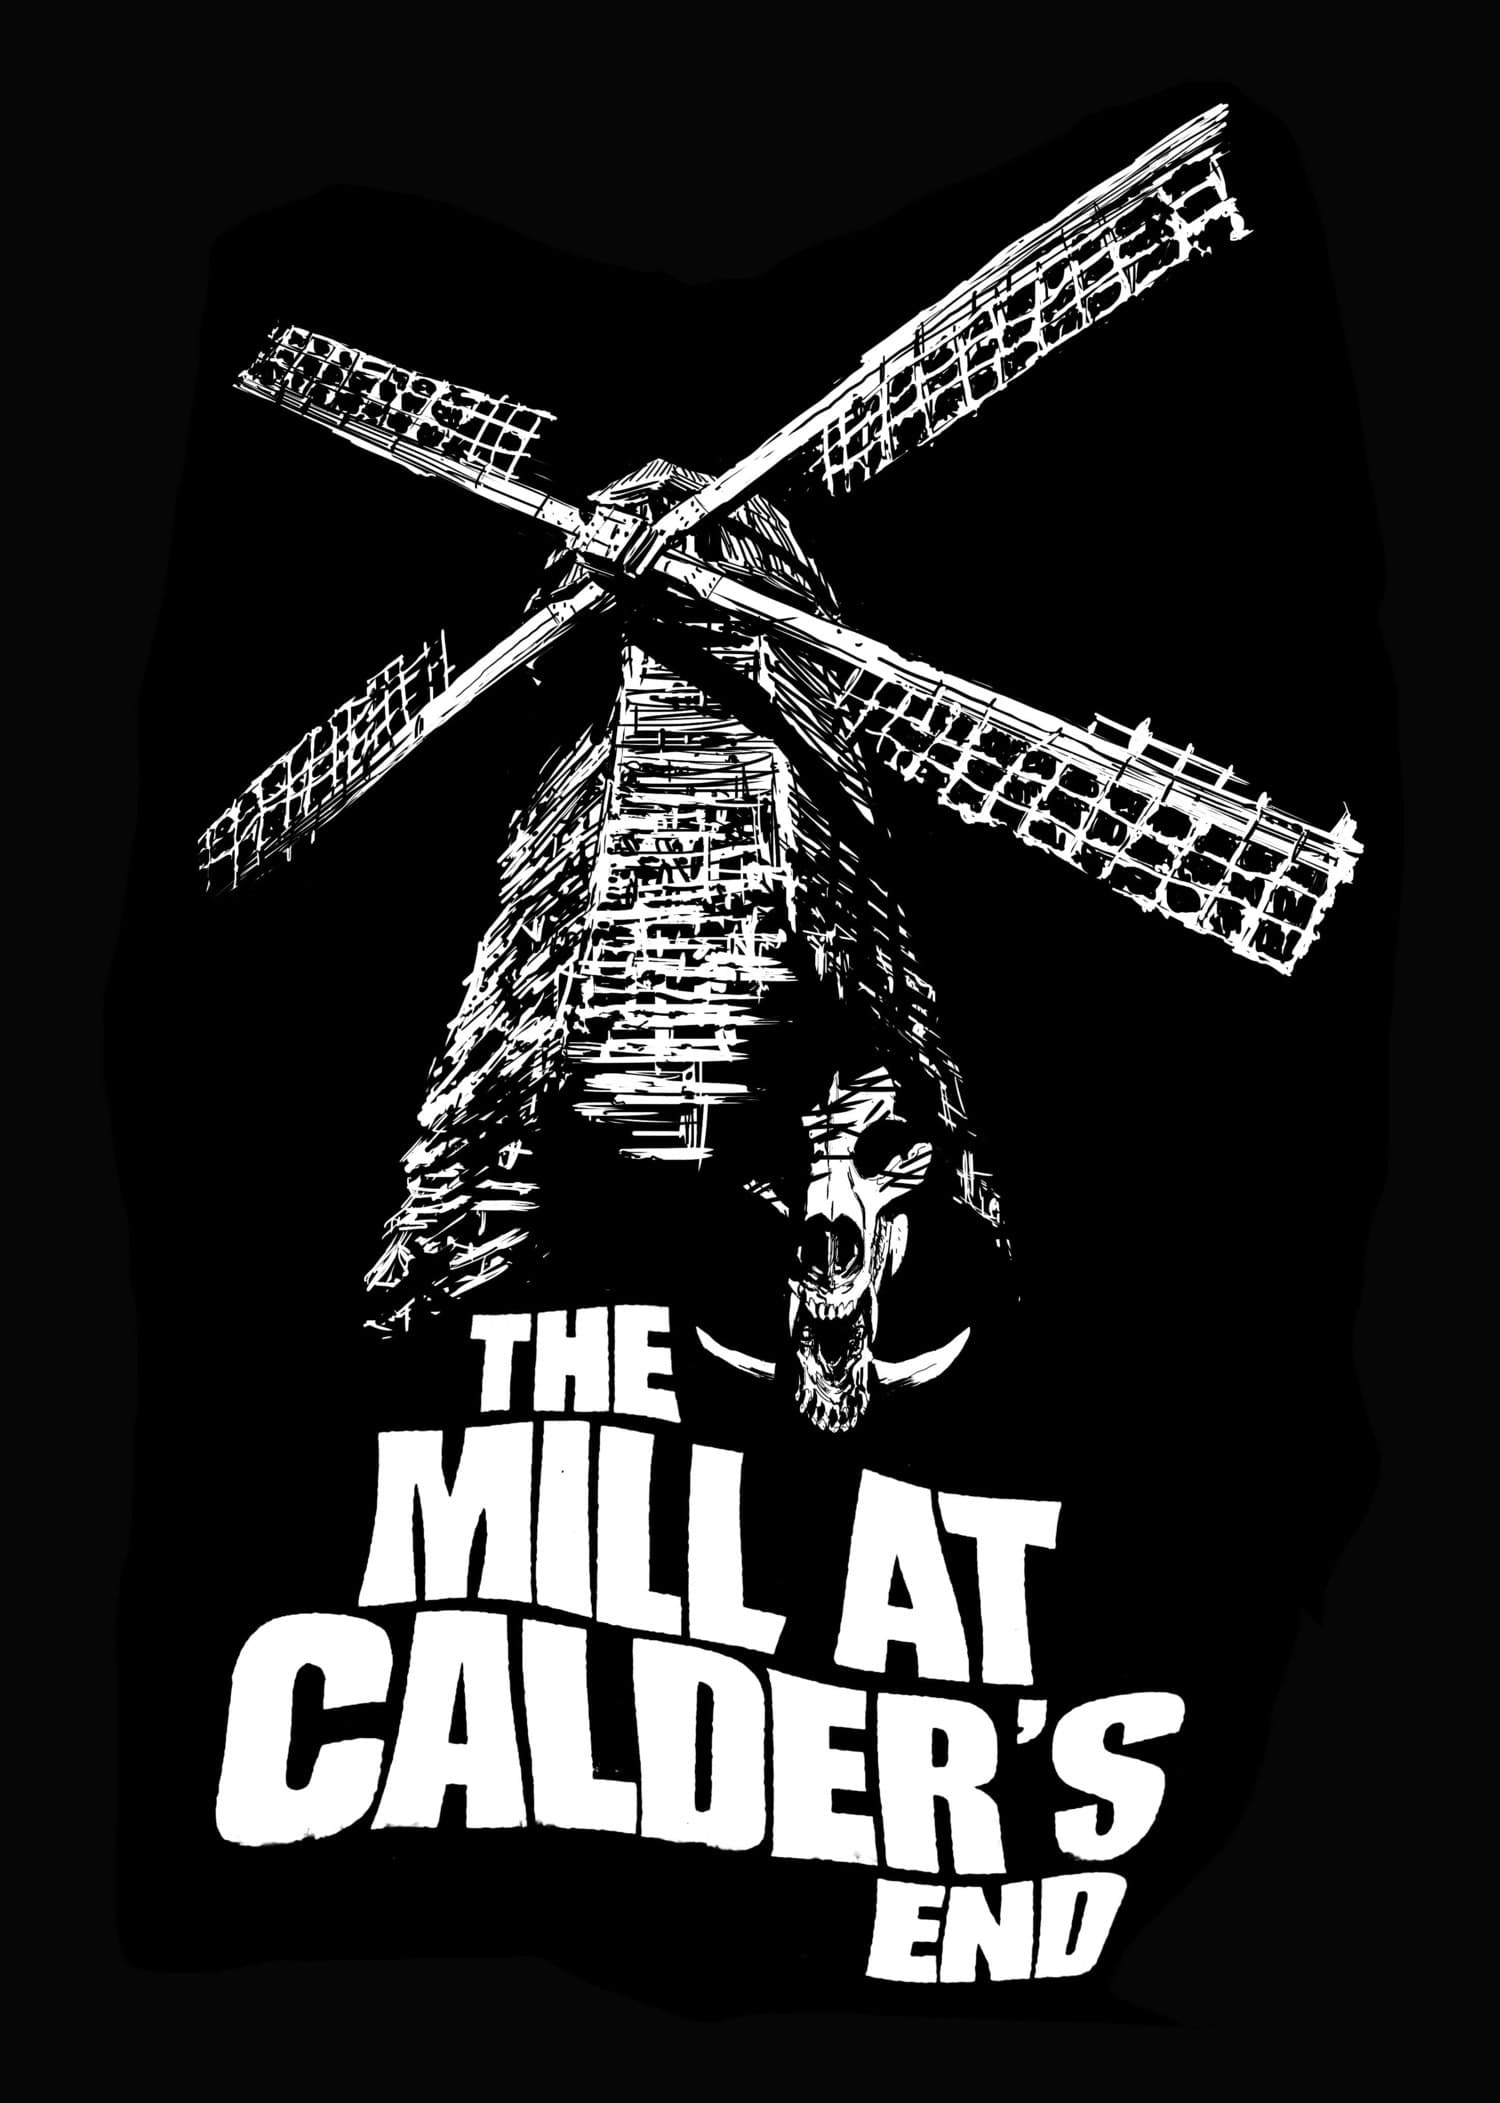 The Mill at Calder's End